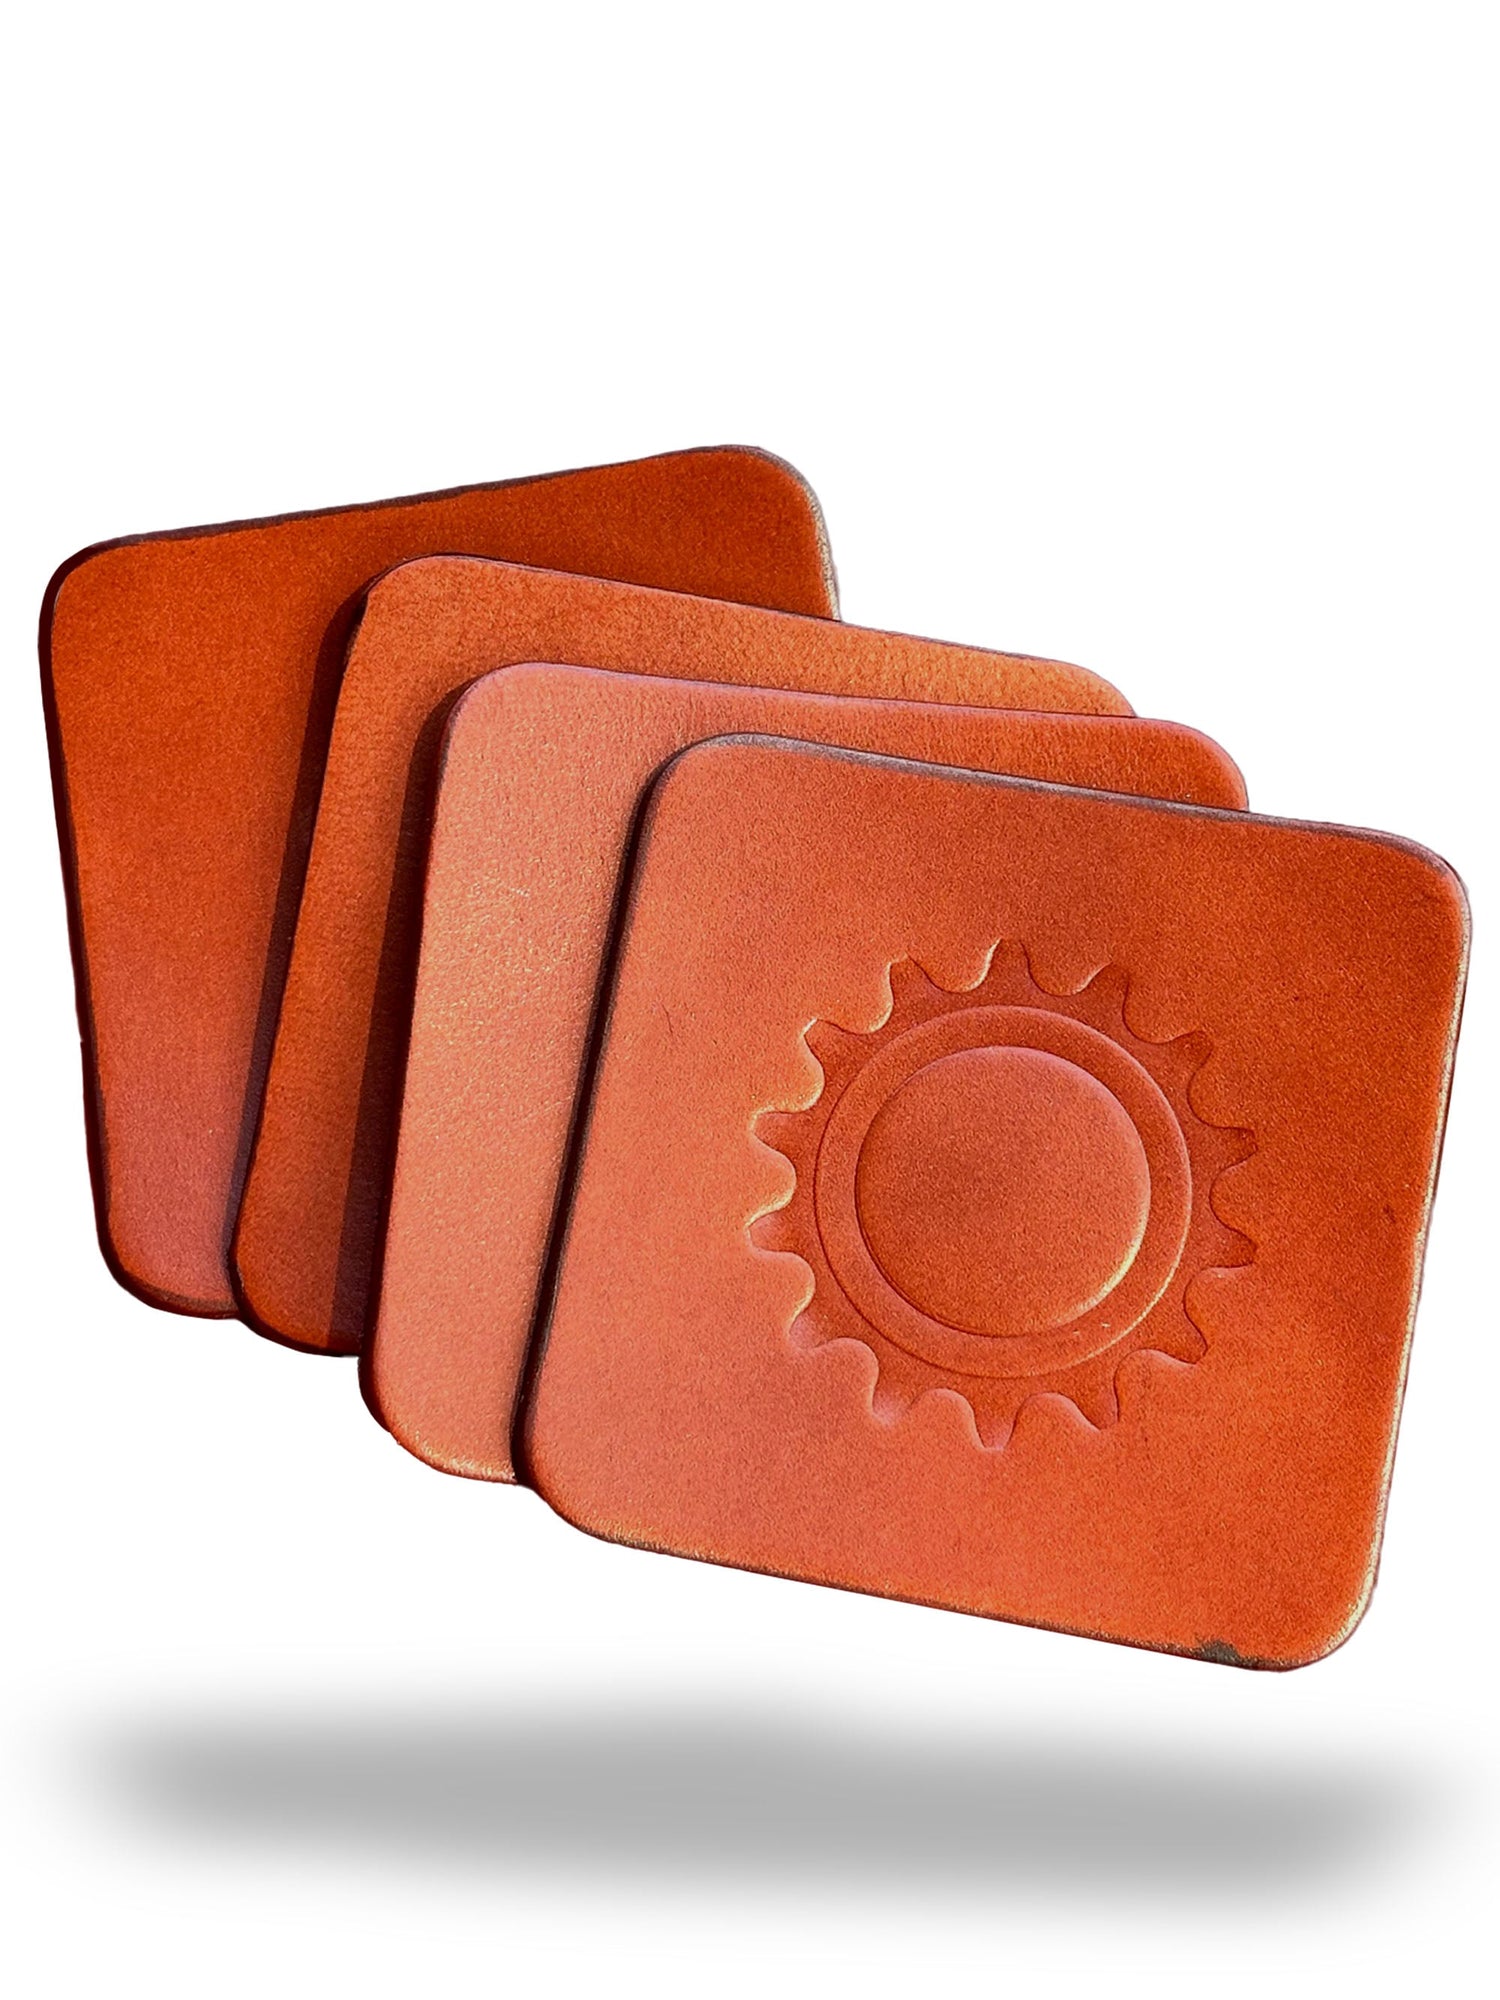 Square Leather Coasters with Bicycle Cog Design - Set of 4